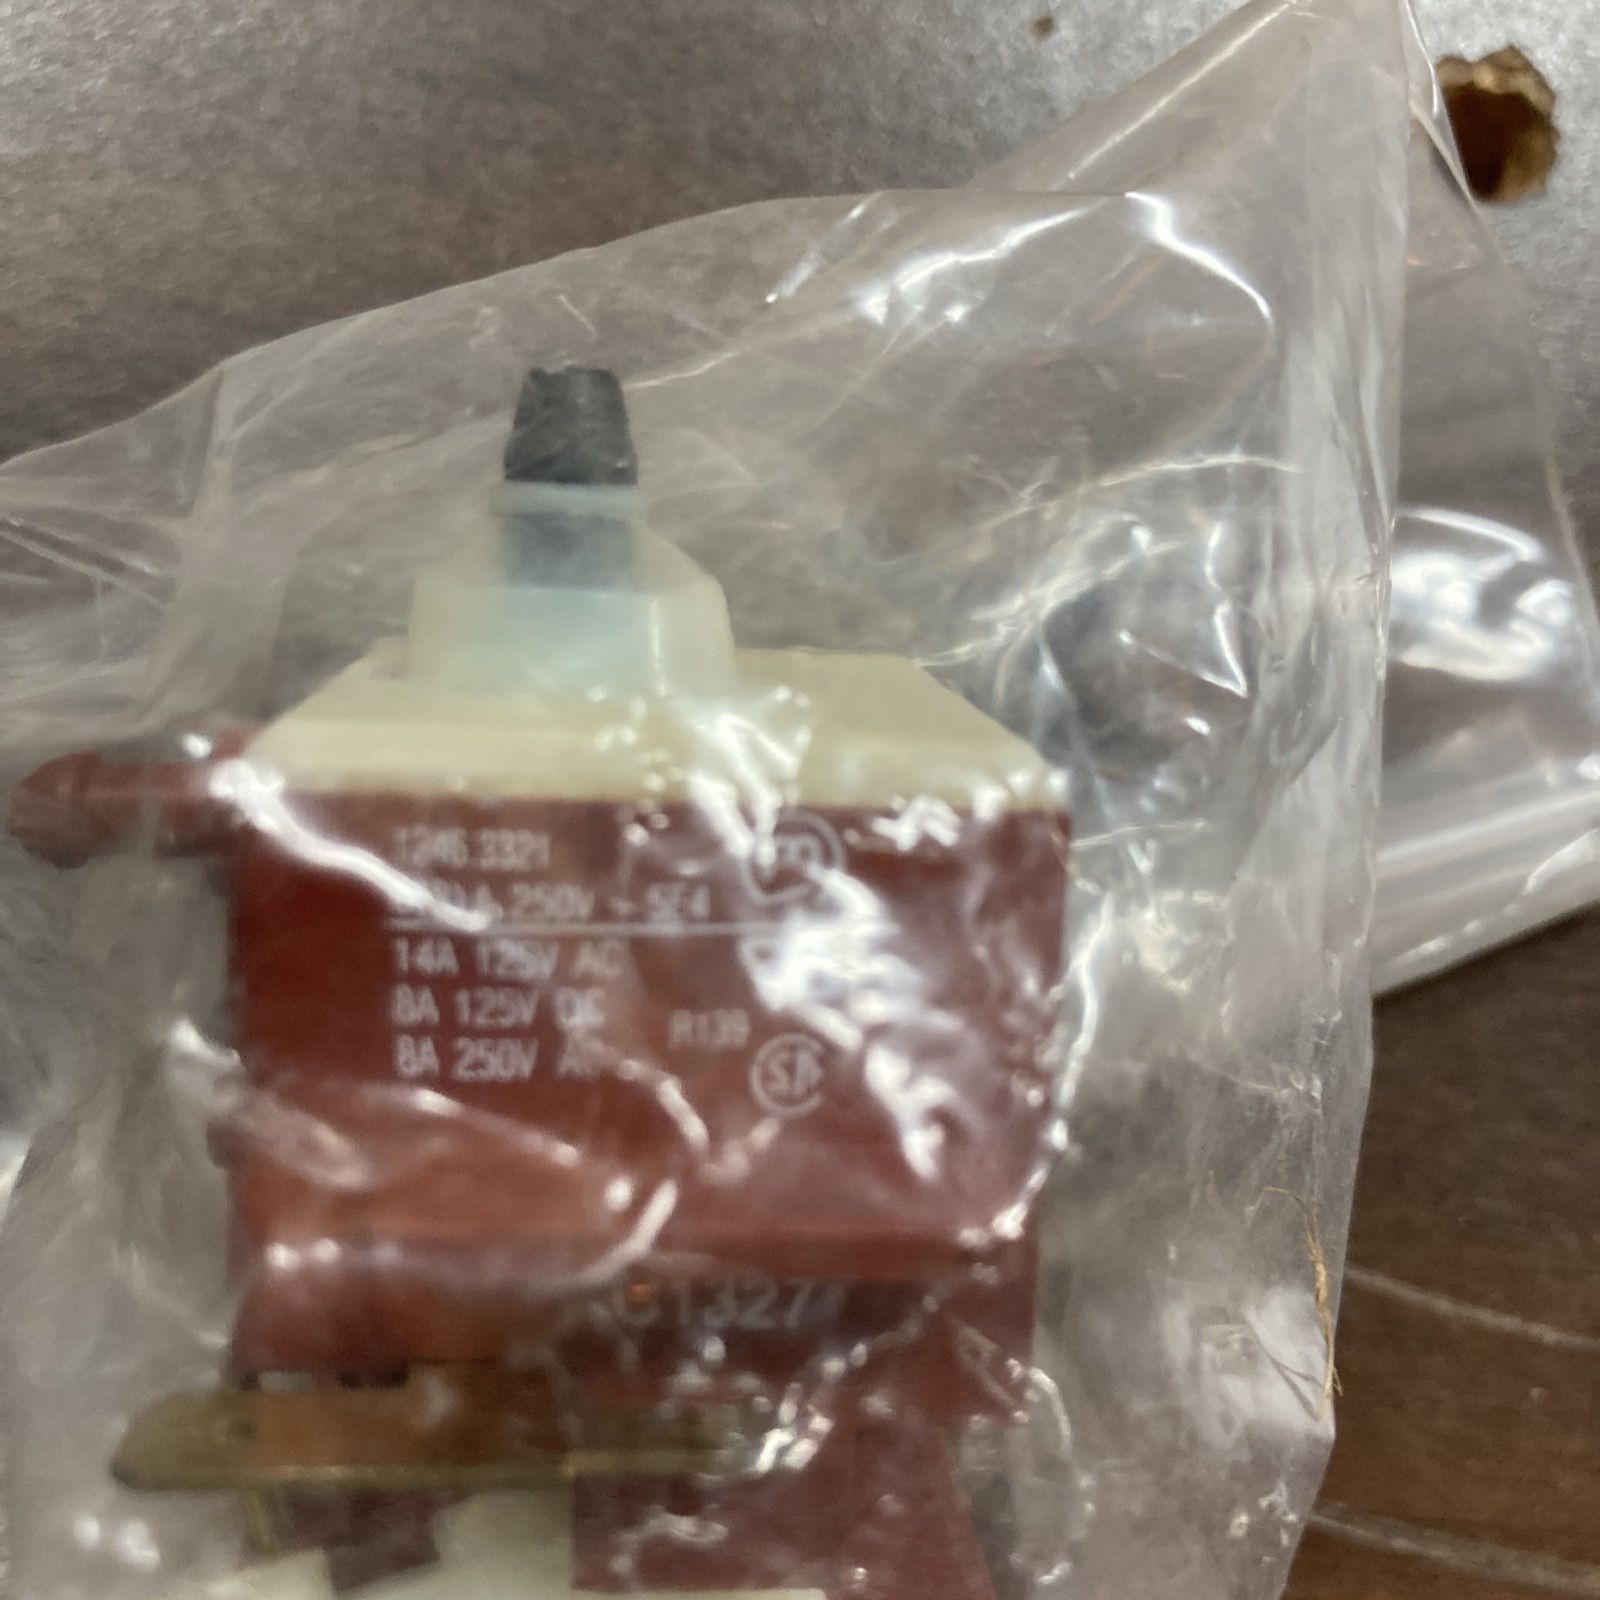 Milwaukee 23-66-2401 Genuine Replacement Switch of them brand new for  Sale in Cheswick, PA OfferUp